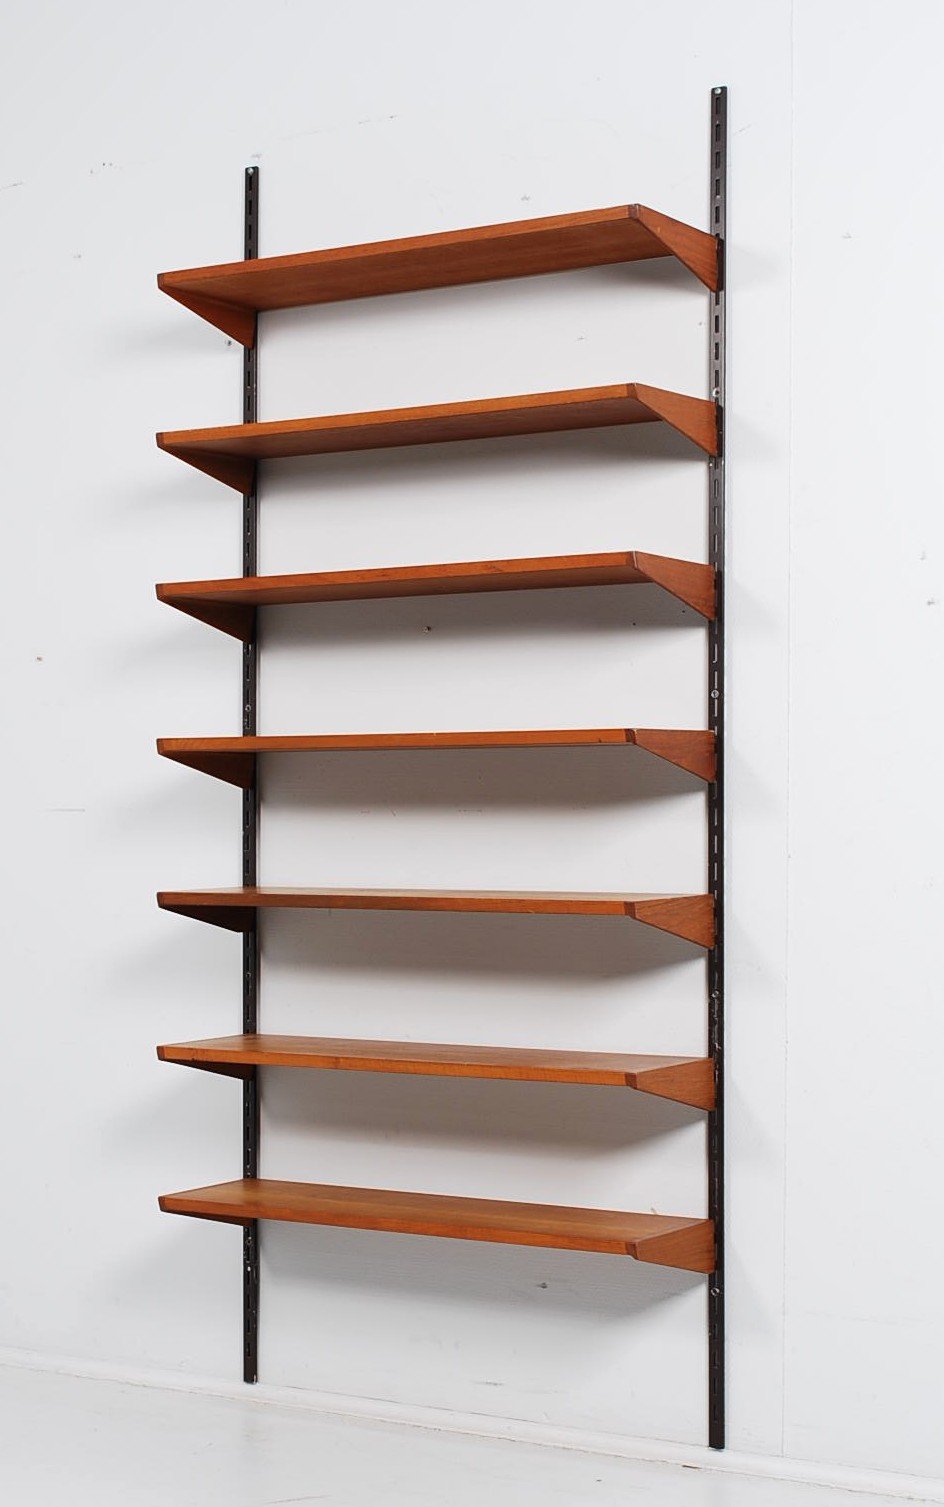  wall, and use of desirable wood looks amazing on these wall shelves